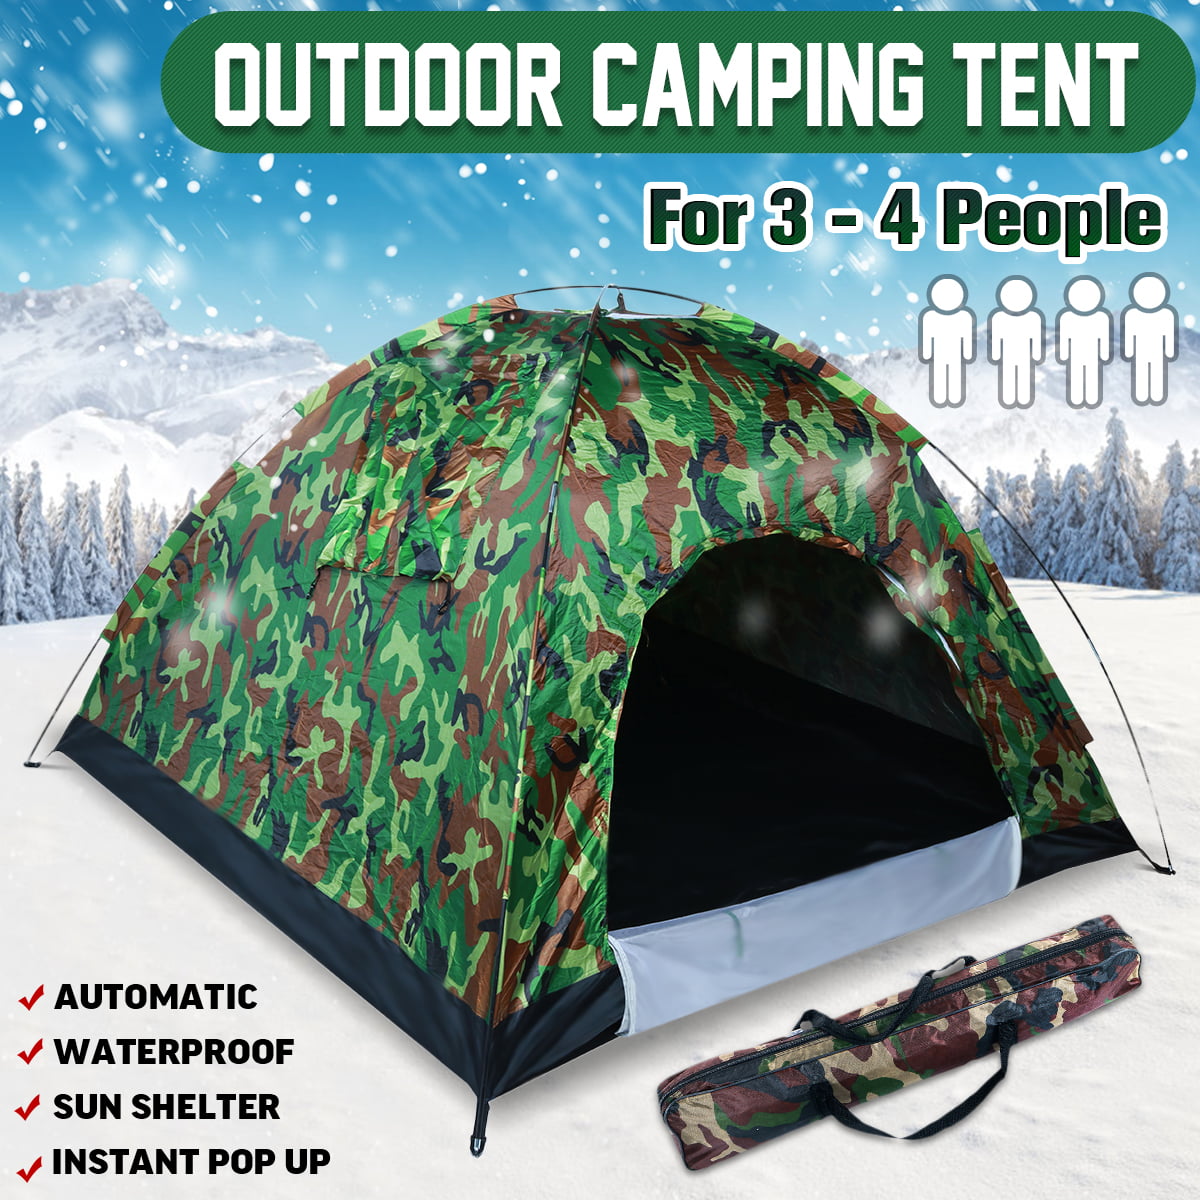 3-4 person auto-open tent up in 1 minute! From bag to set 